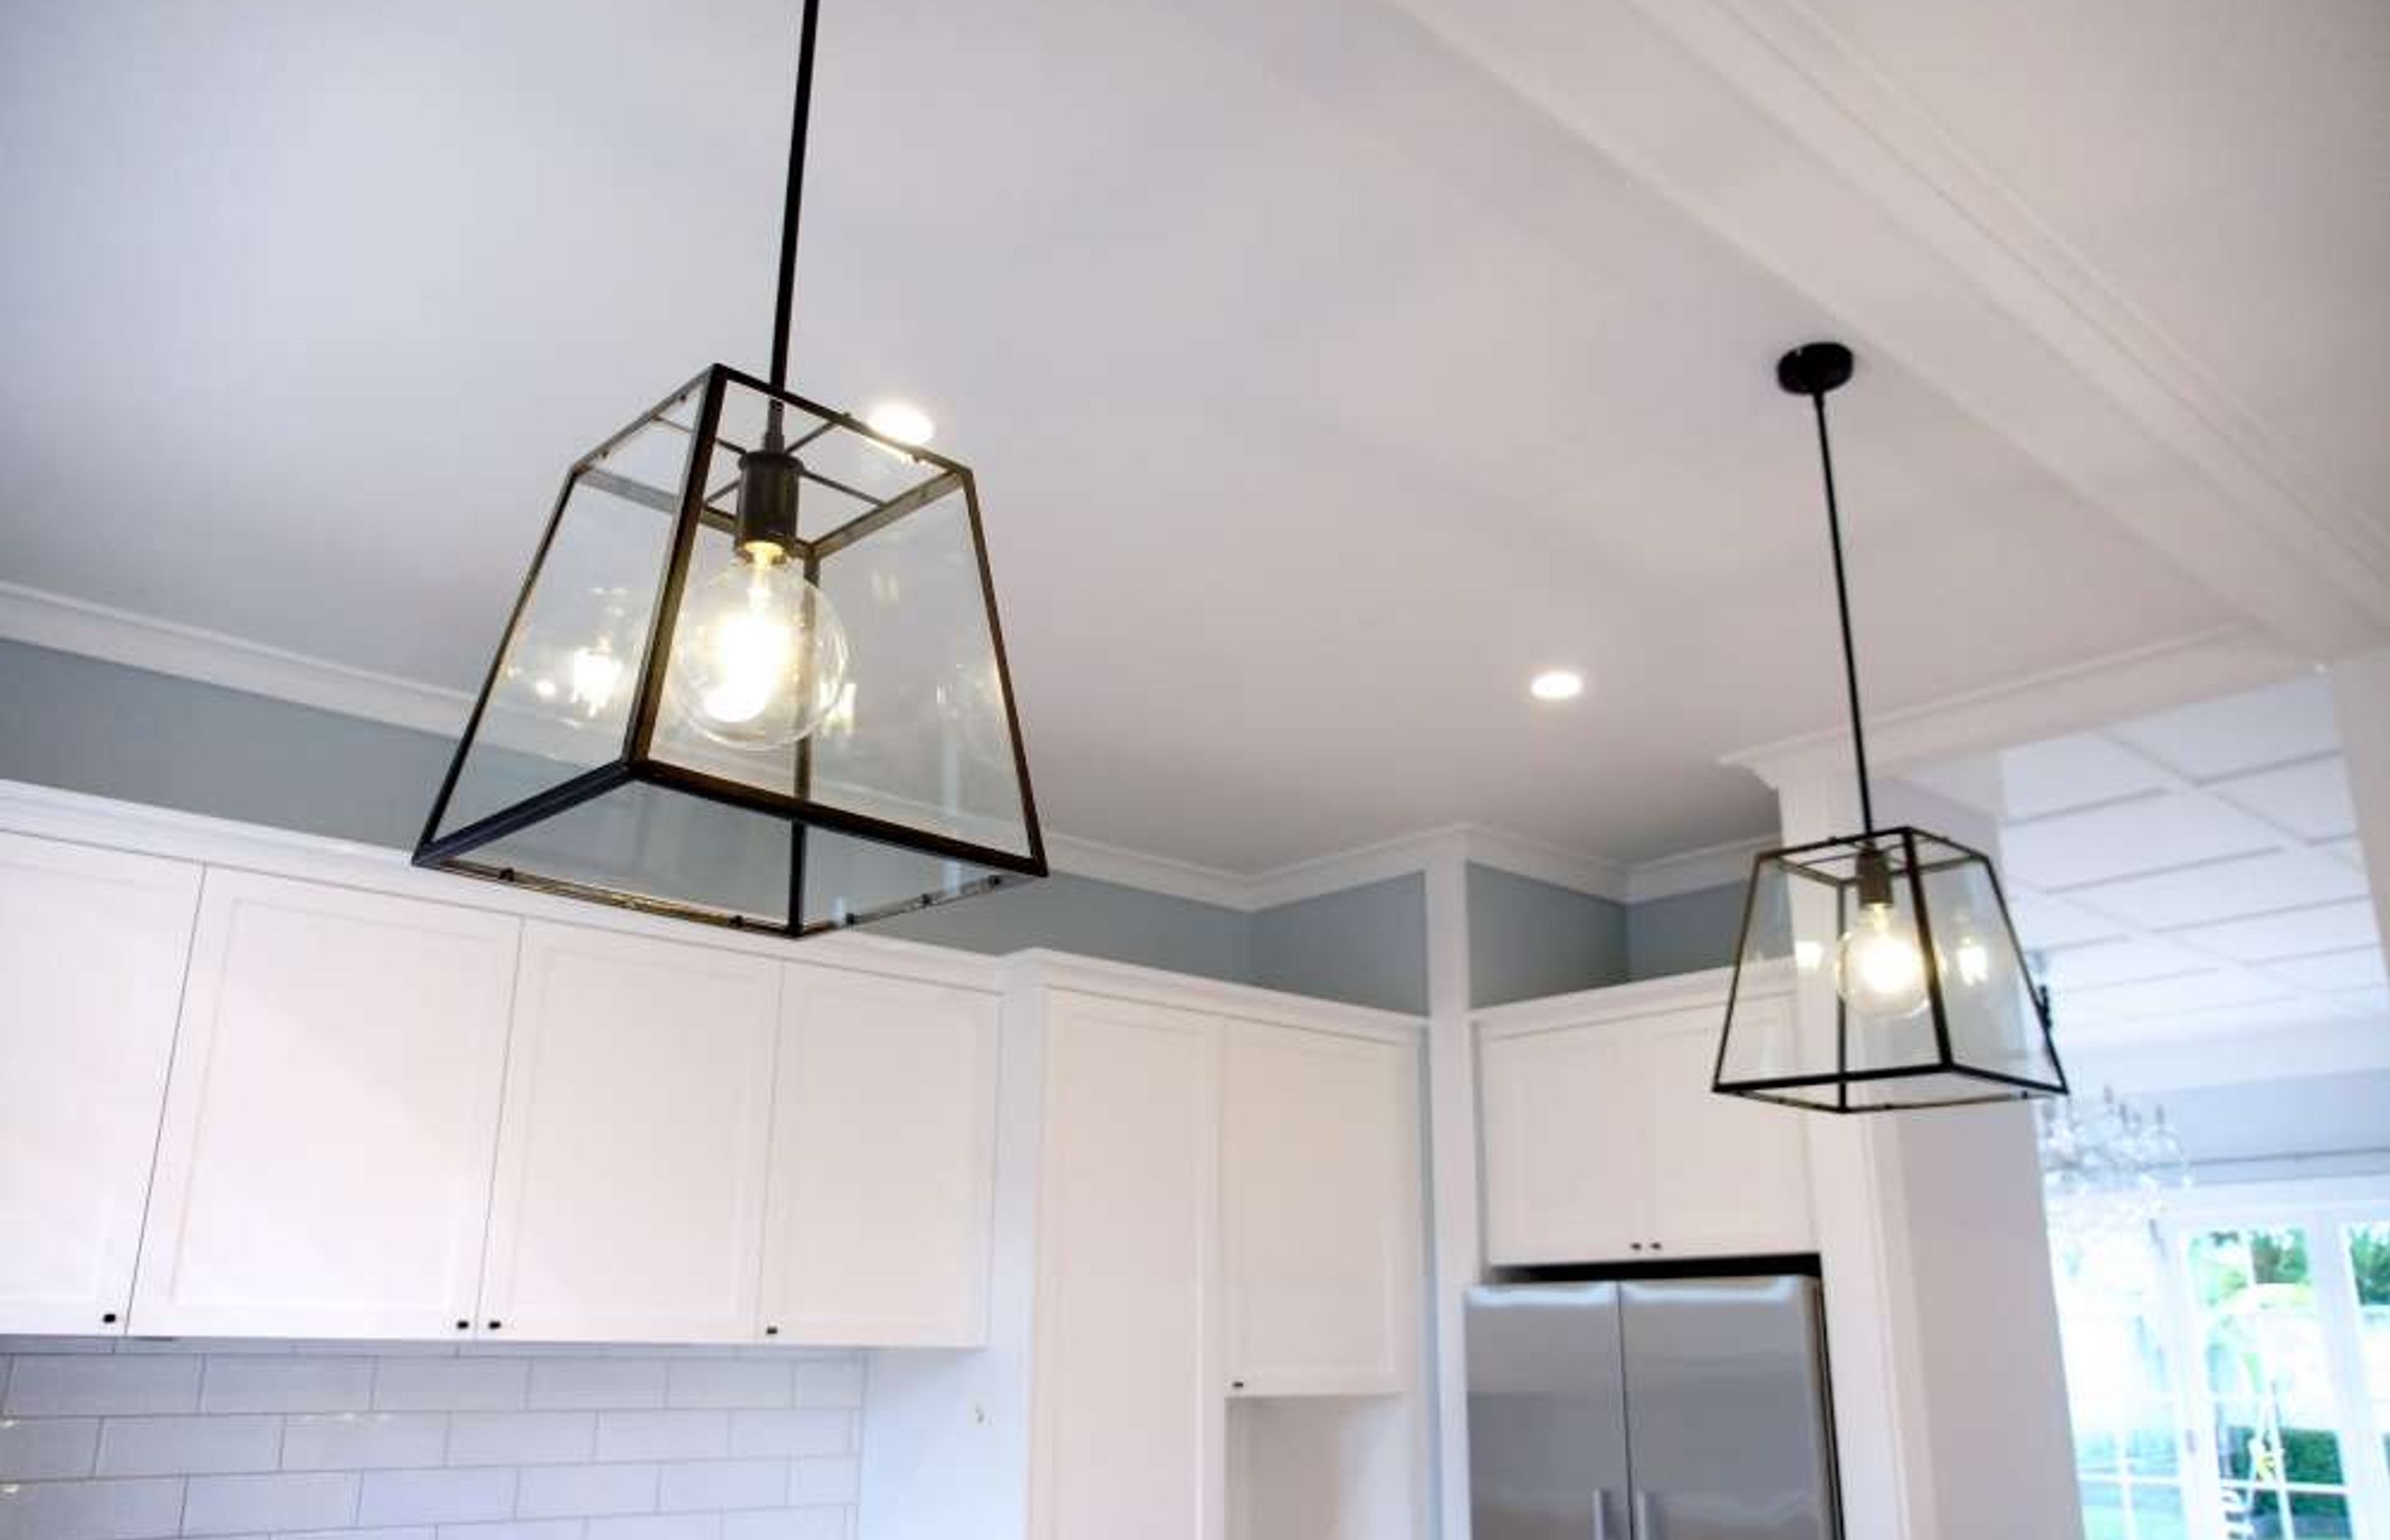 Two separate long pendant lights installed above the breakfast Island